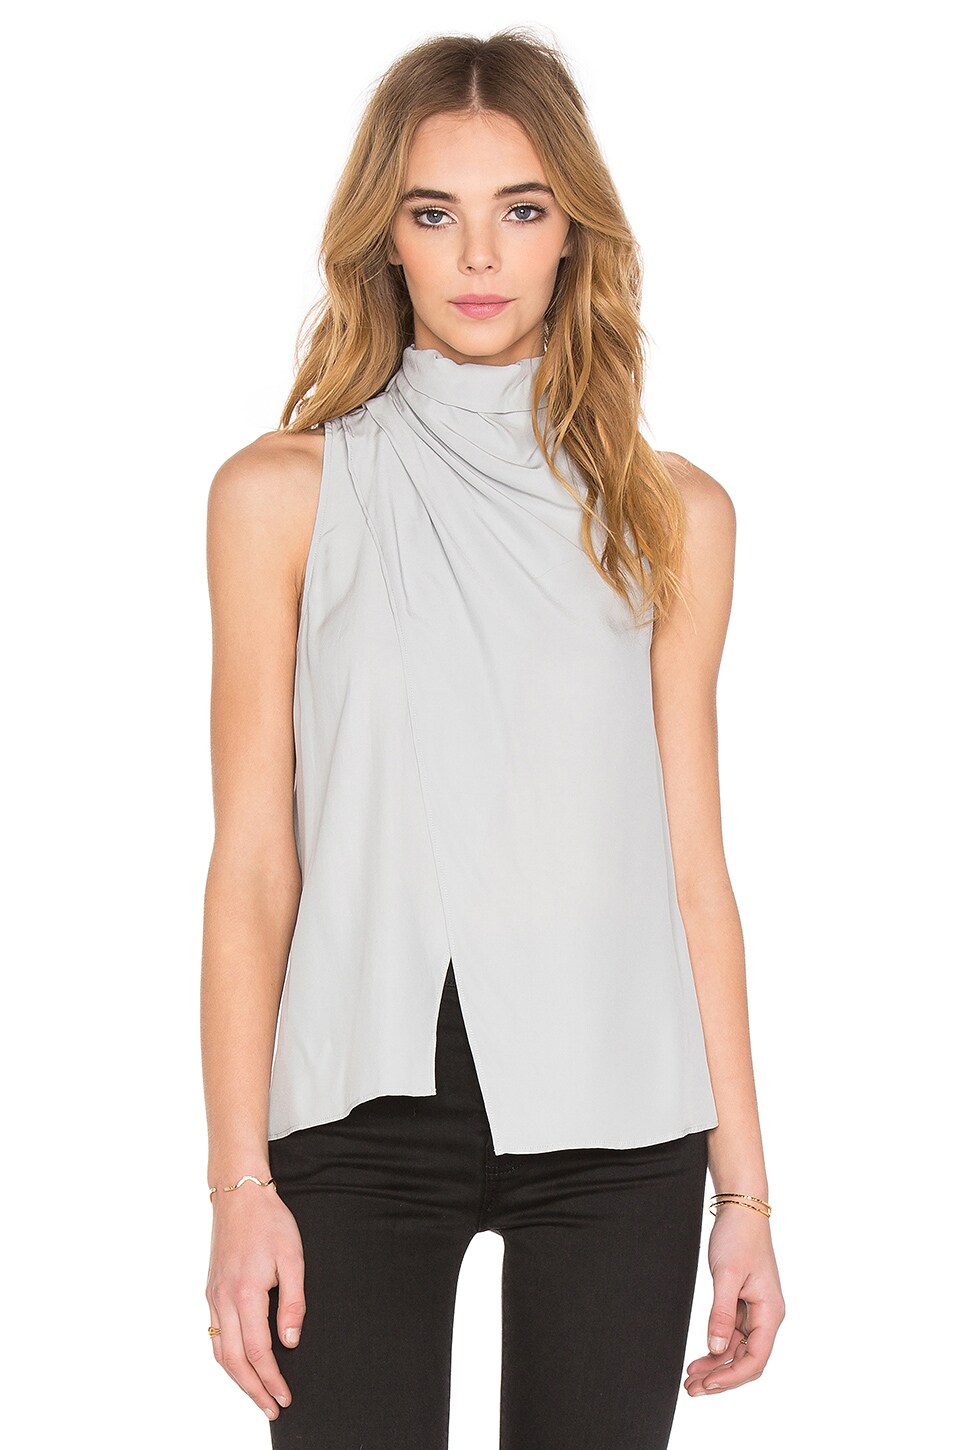 C/MEO Crossing Paths Silk Top in Silver | REVOLVE